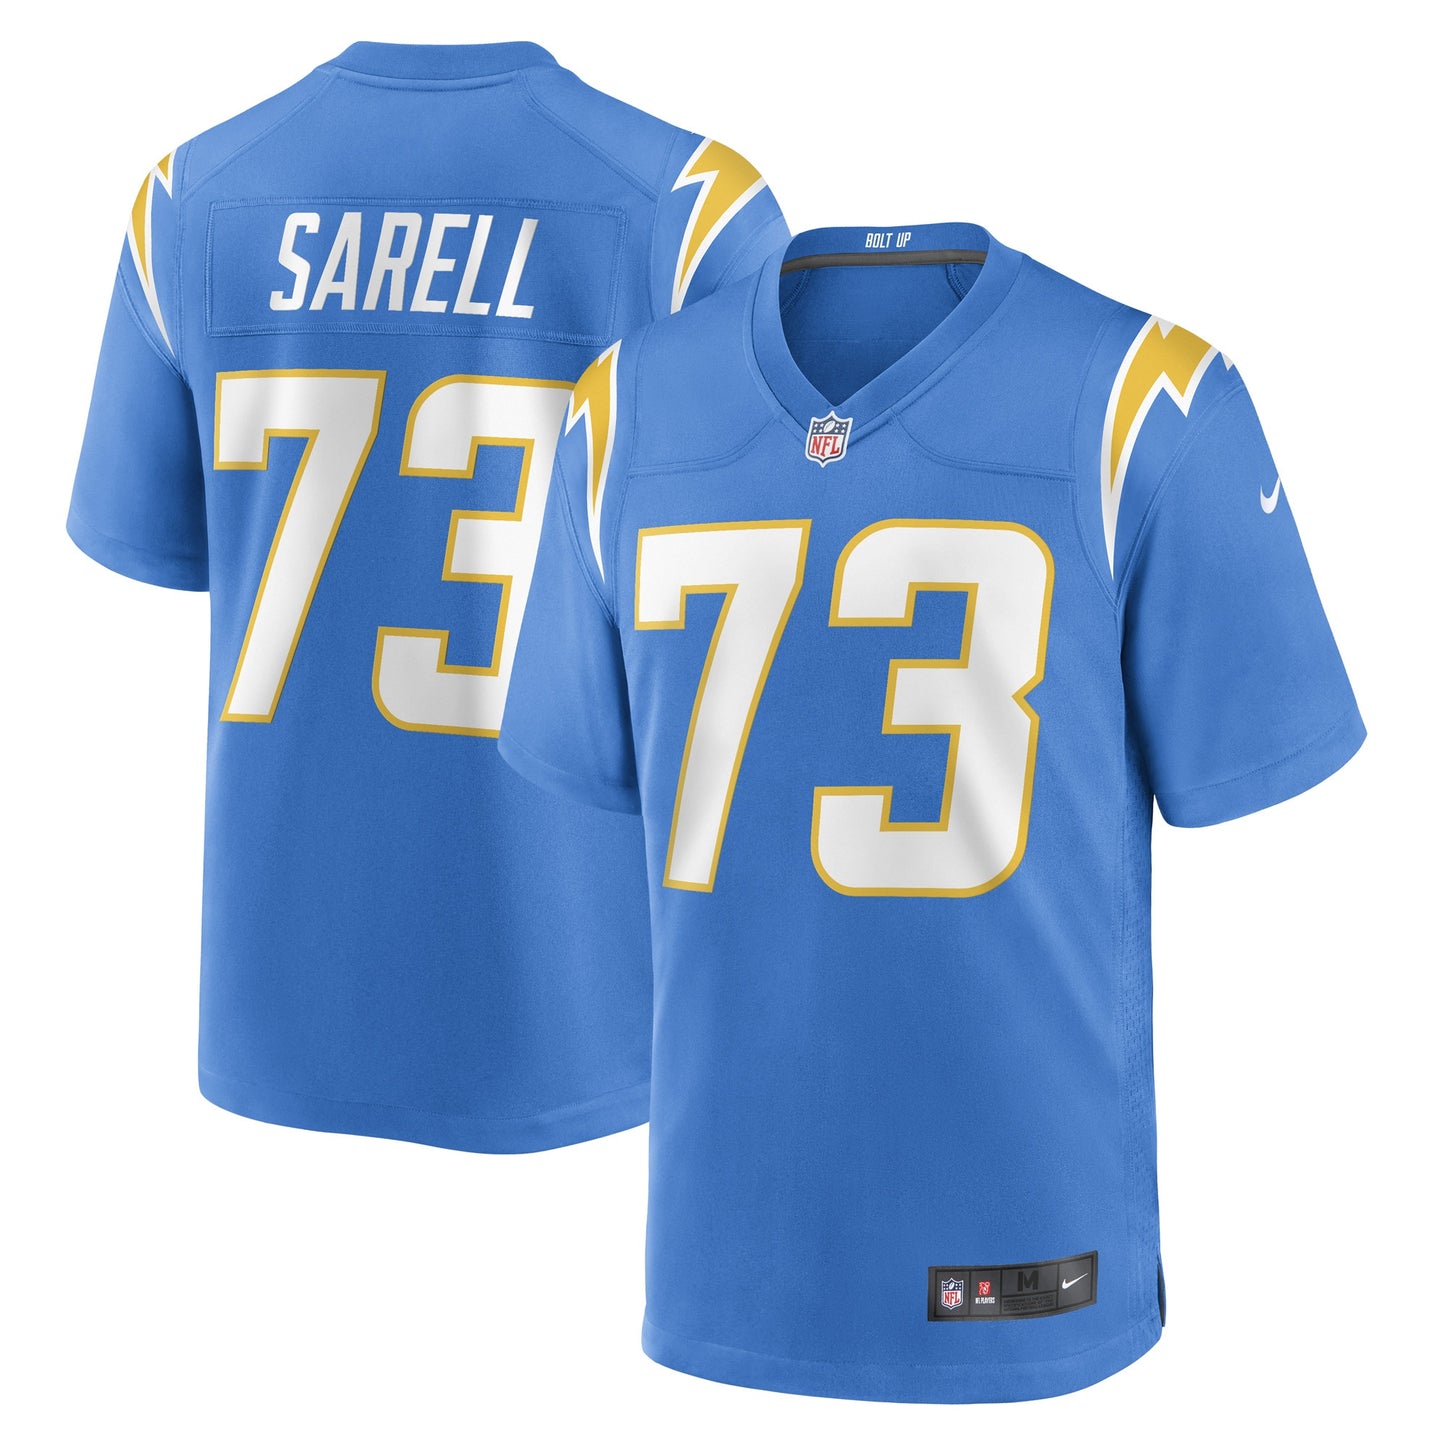 Foster Sarell Los Angeles Chargers Nike Game Player Jersey - Powder Blue